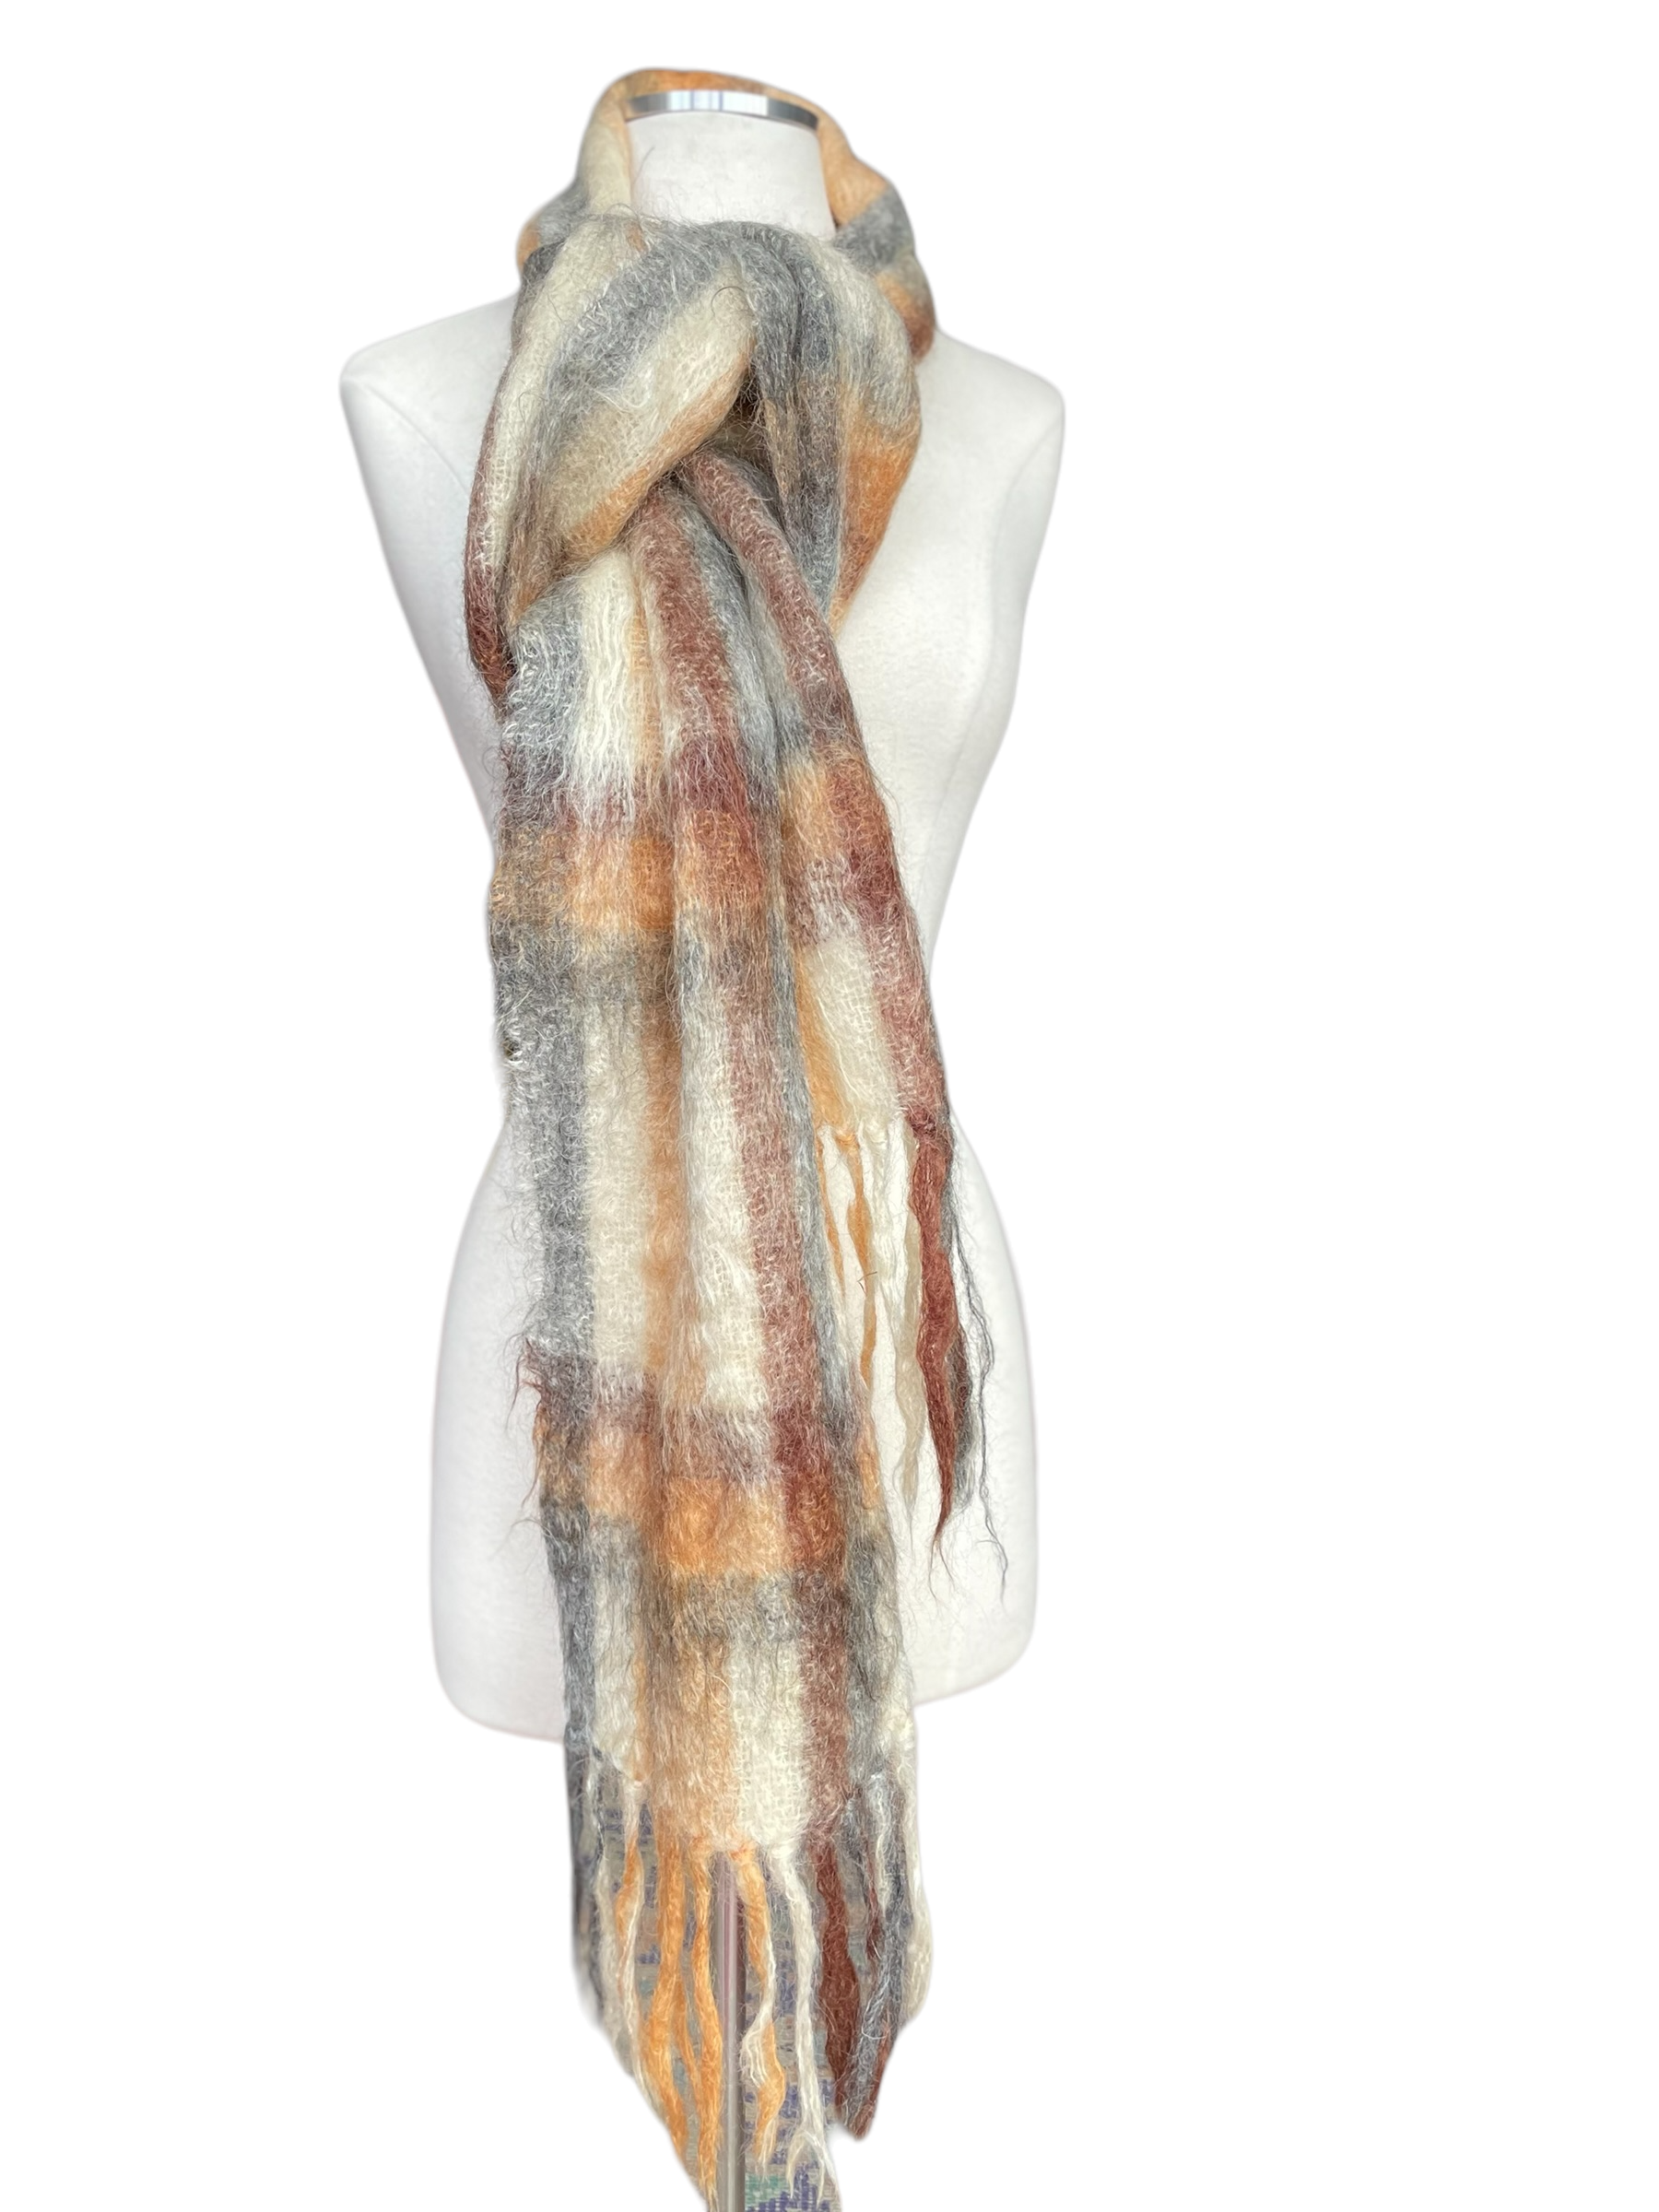 Full front of wrapped scarfVintage Wool Mohair Plaid Scarf | Barn Owl Vintage | Seattle True Vintage